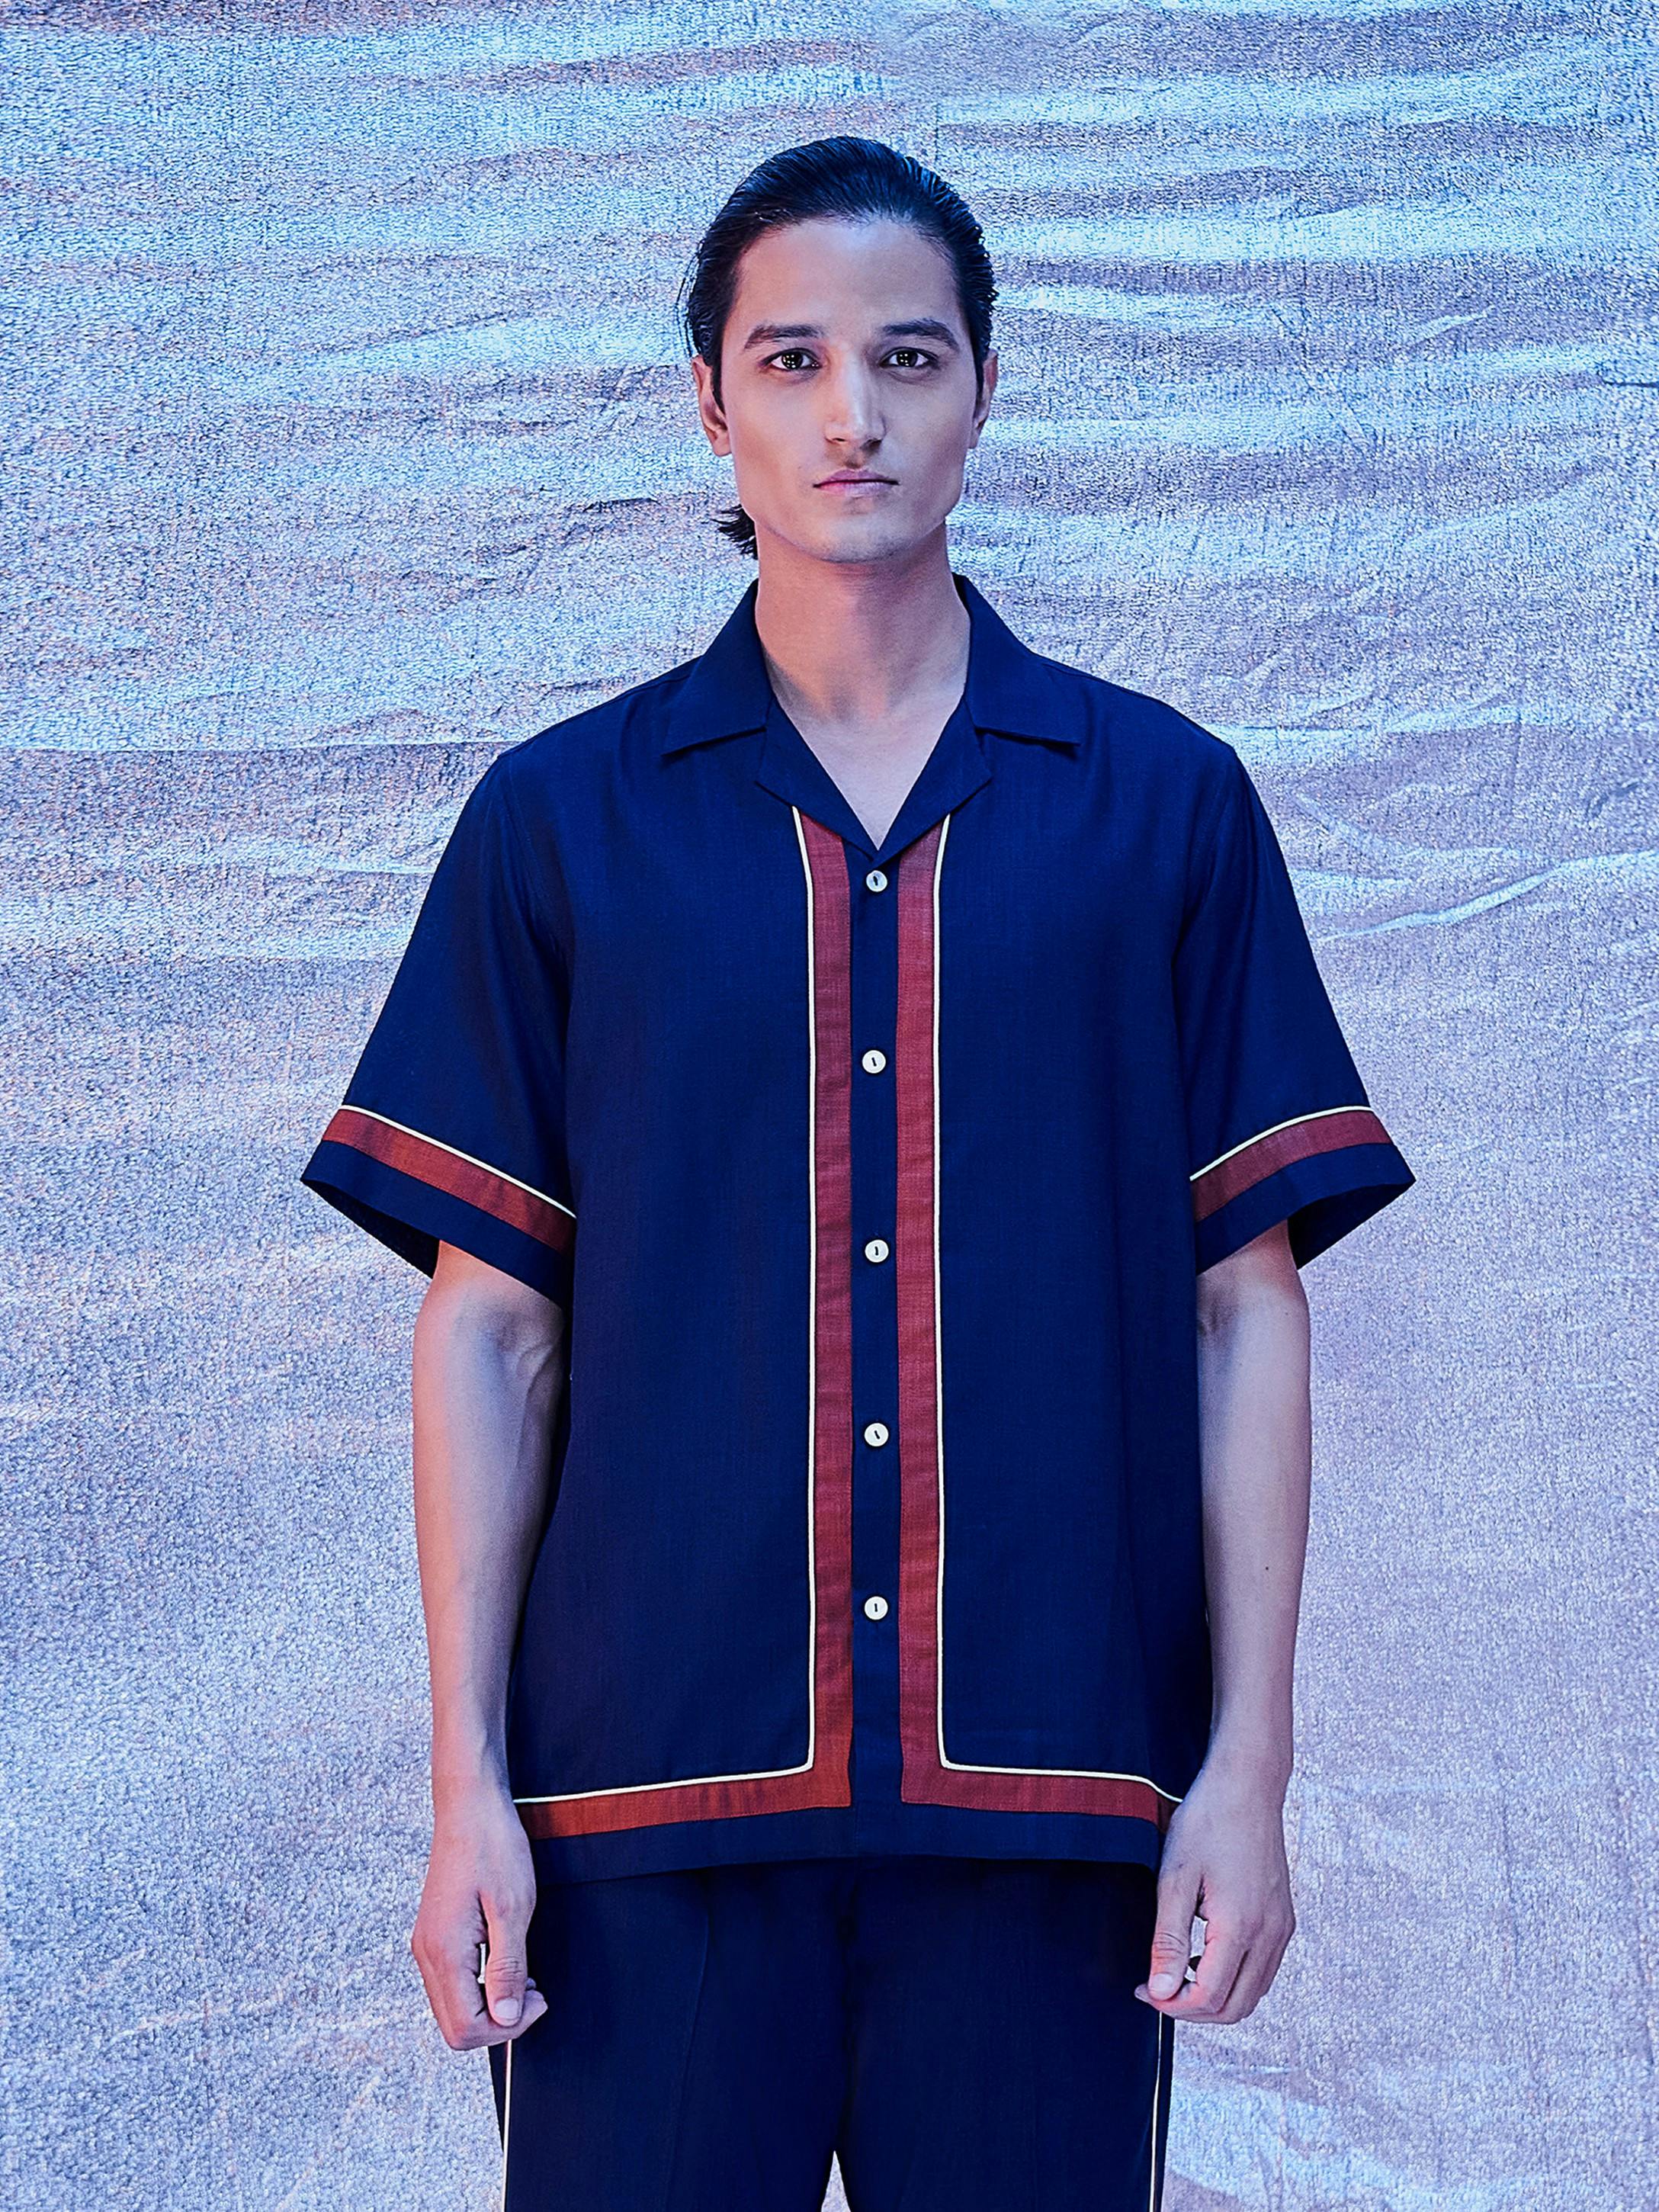 Colorcret Resort Shirt- navy, a product by Line Outline